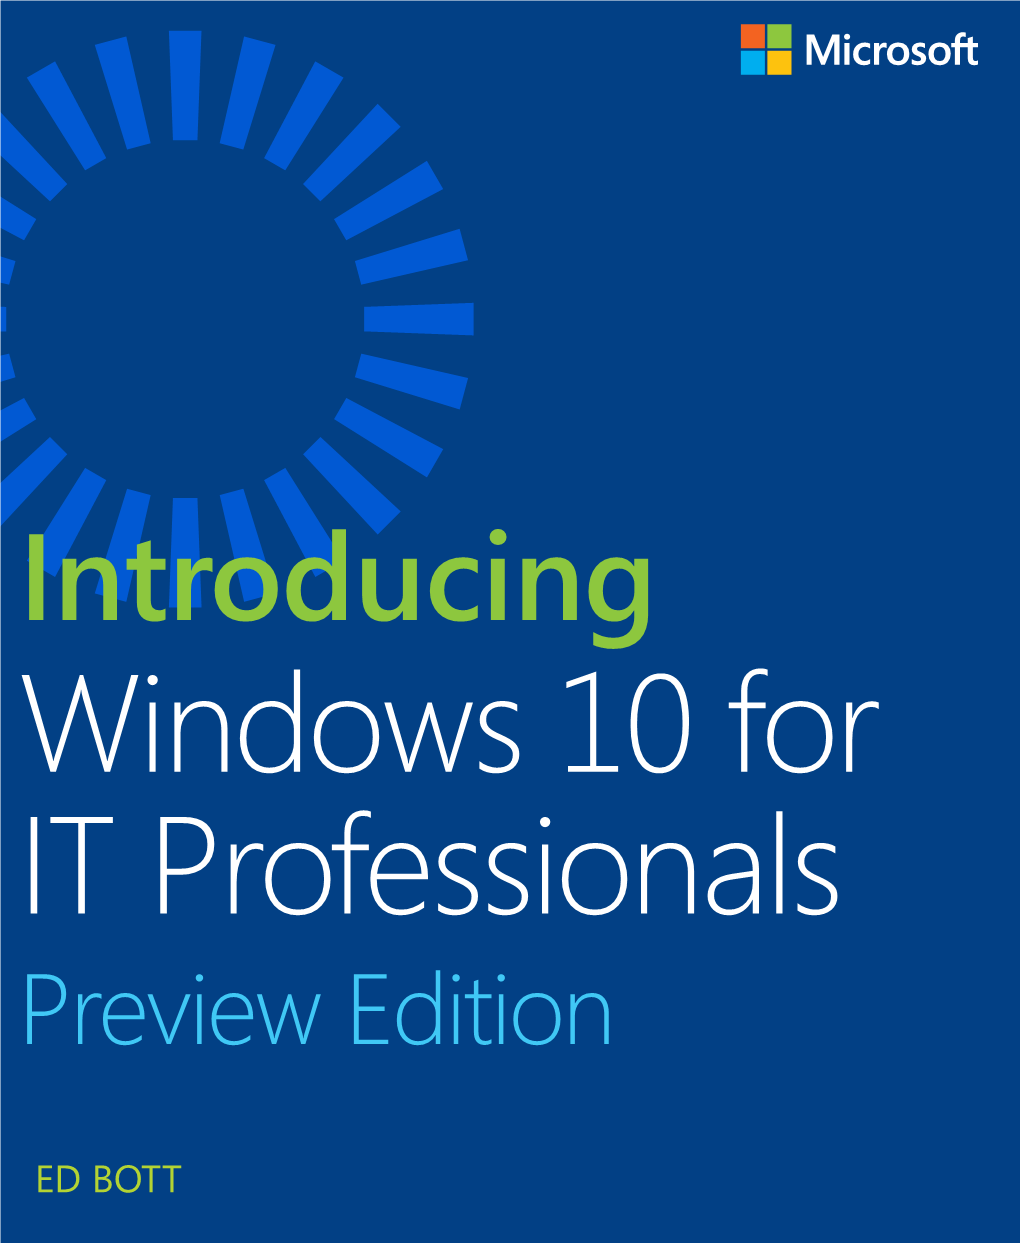 Introducing Windows 10 for IT Professionals Preview Edition